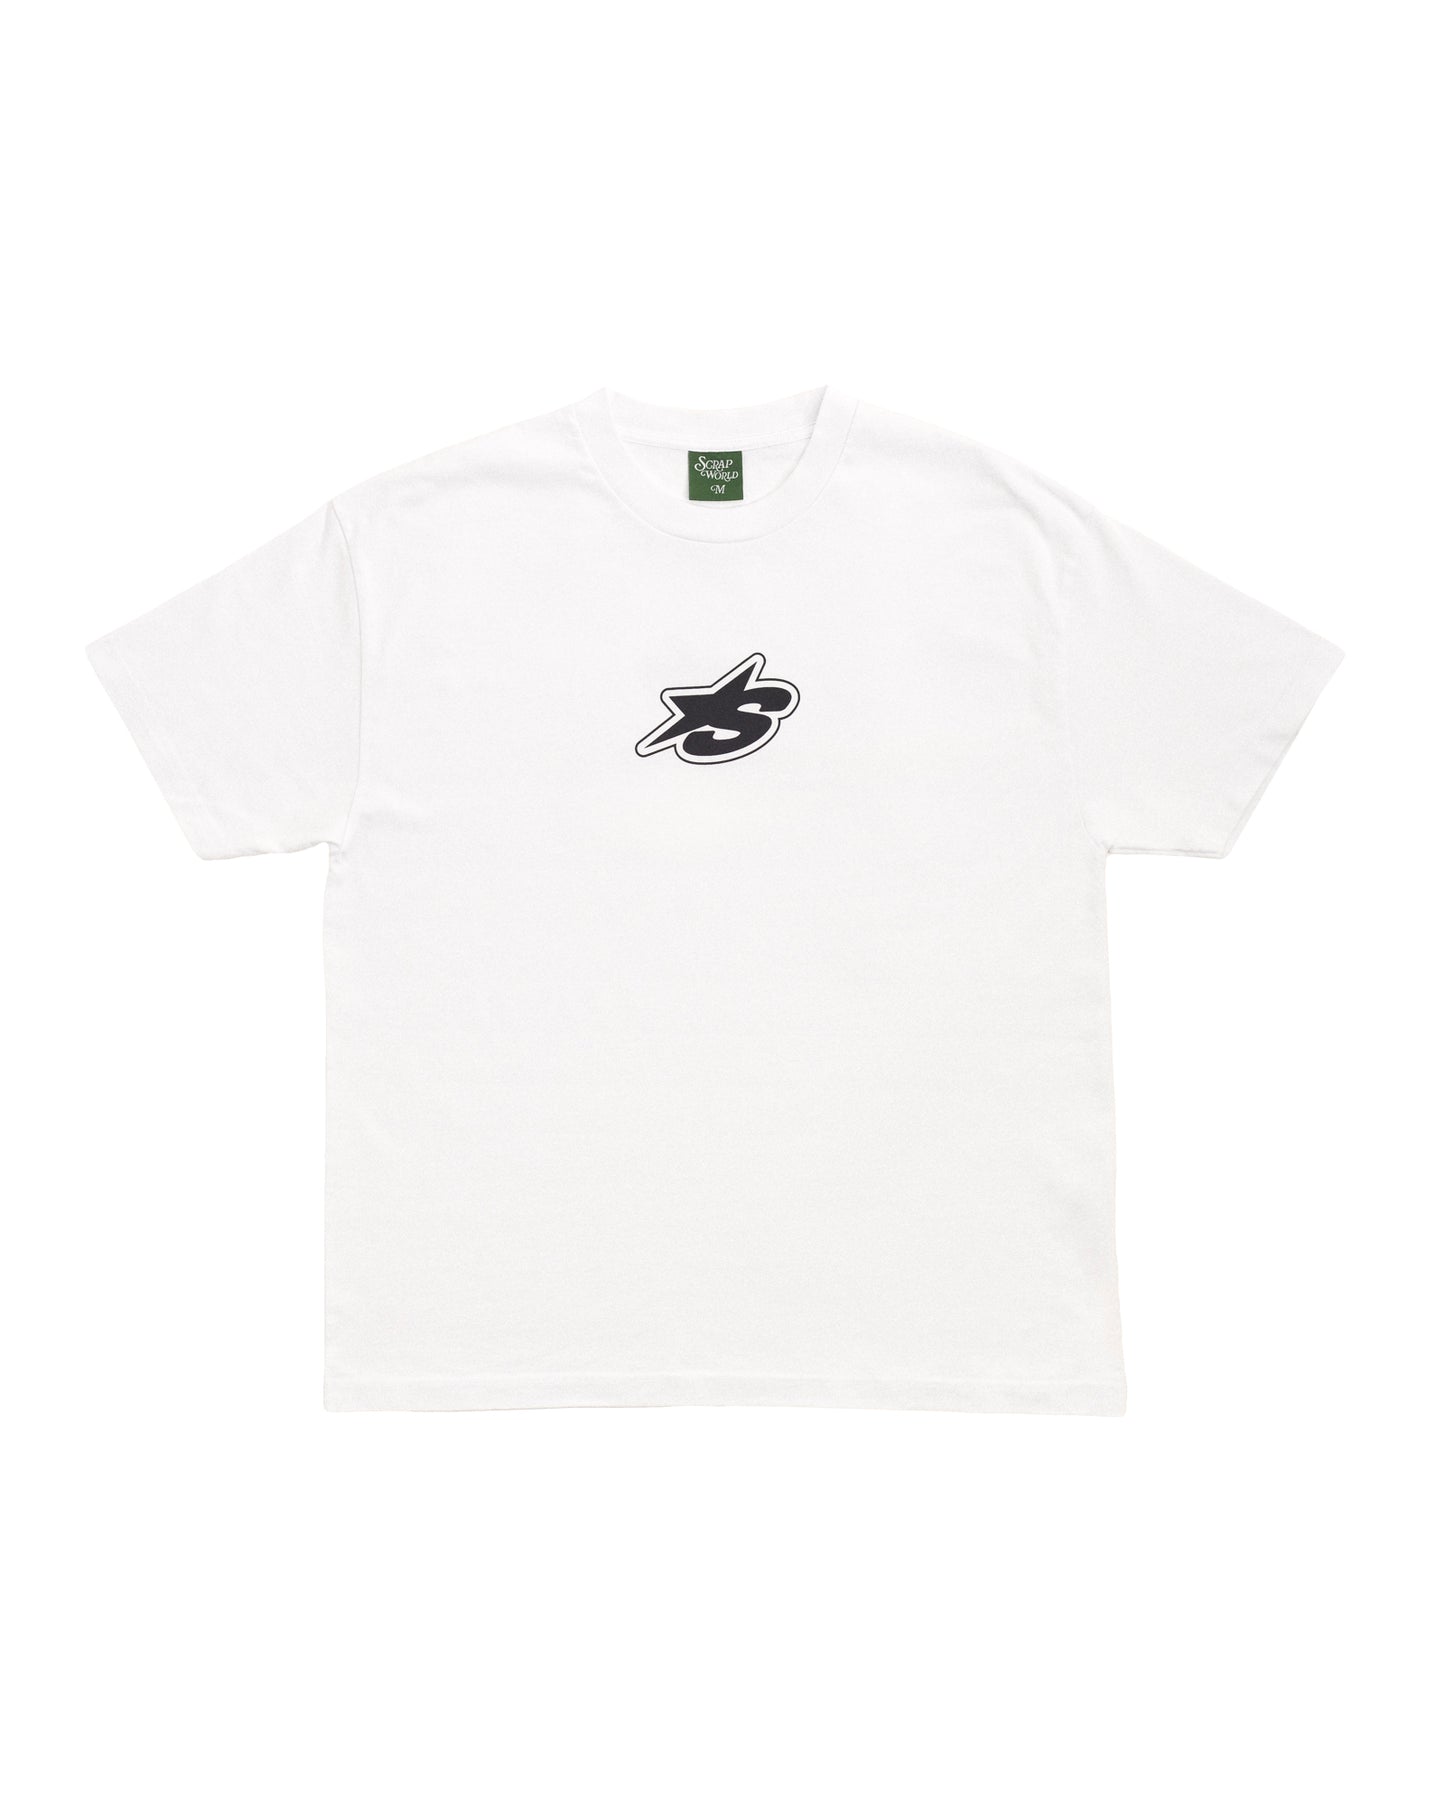 BY US FOR US WHITE TEE